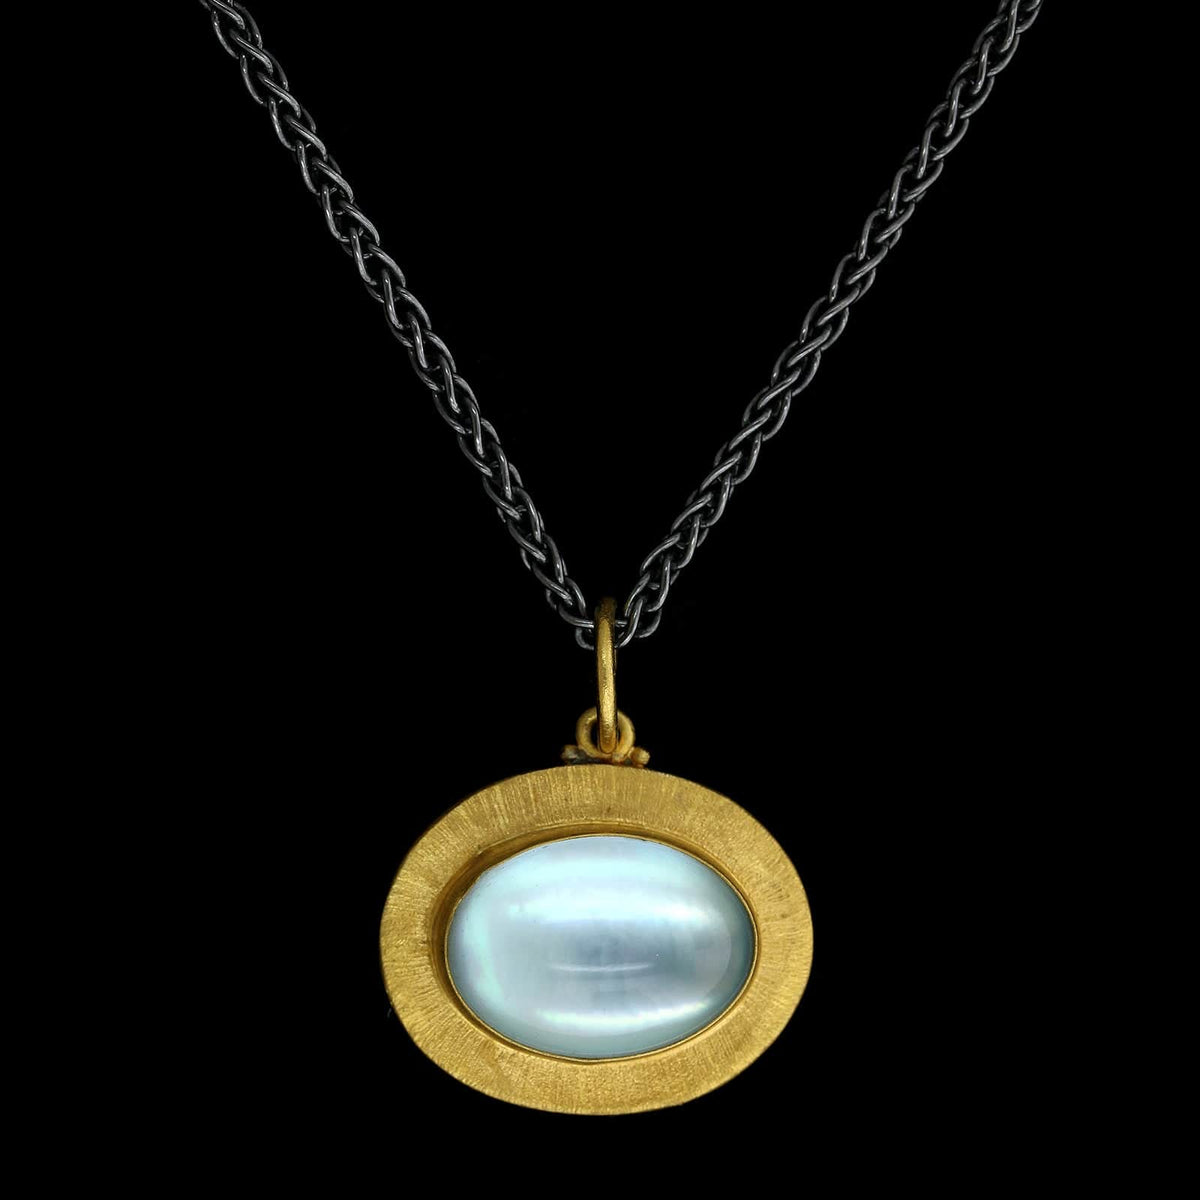 Lika Behar Sterling Silver 24K Yellow Gold Estate Blue Topped Mother of Pearl Pompeii Pendant Necklace